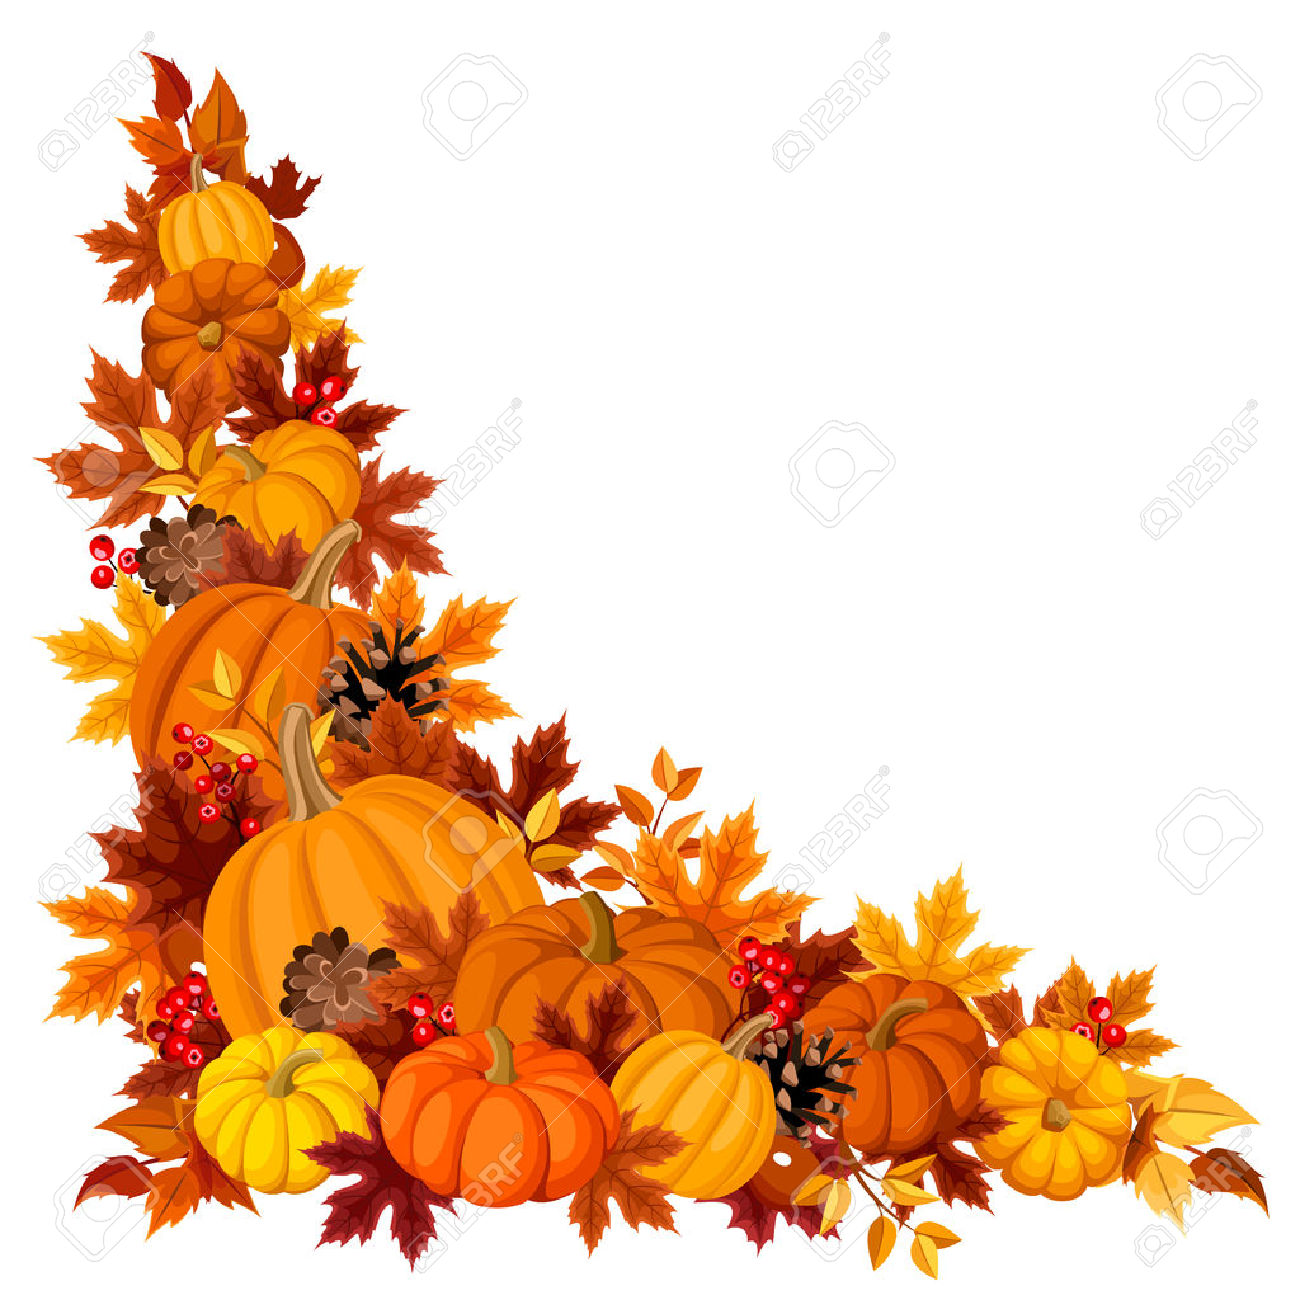 Autumn Flowers Clipart | Free download on ClipArtMag